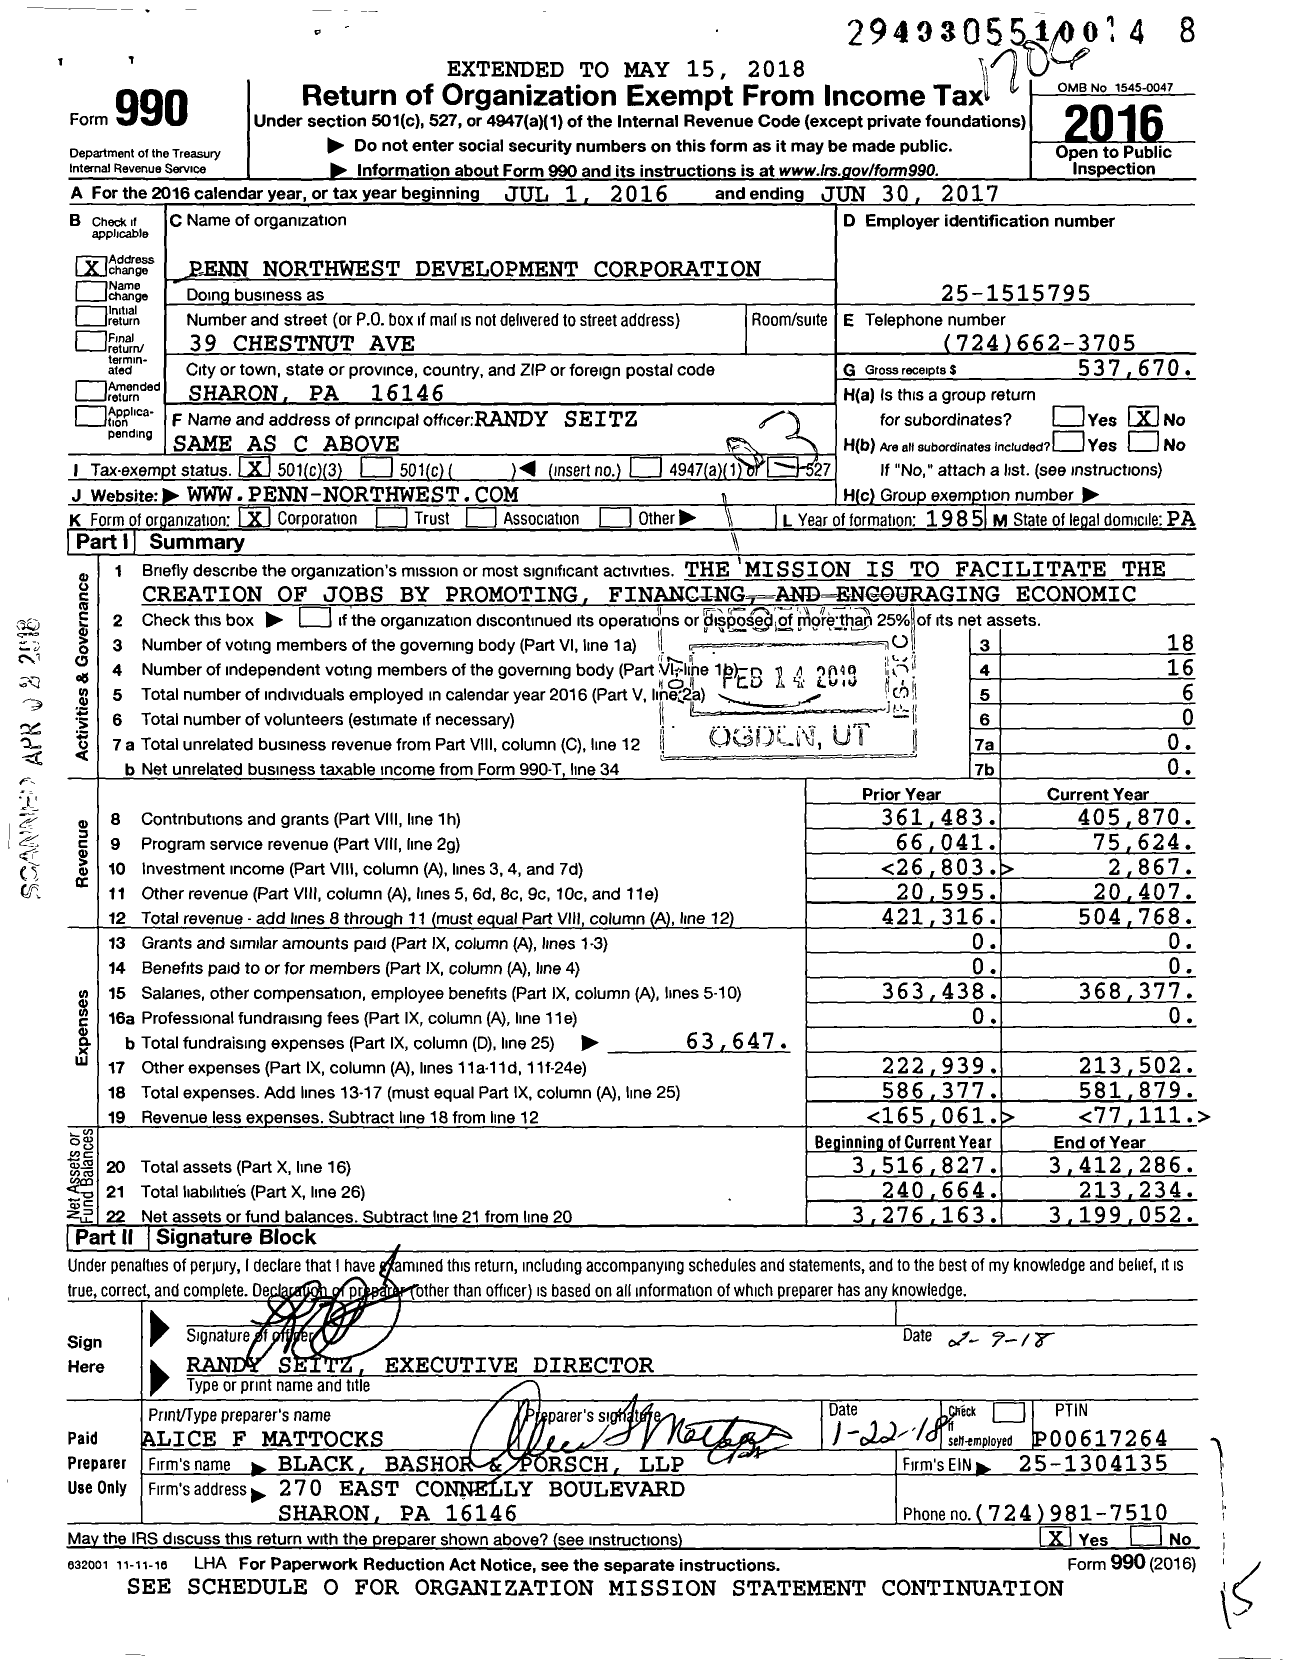 Image of first page of 2016 Form 990 for Penn Northwest Development Corporation